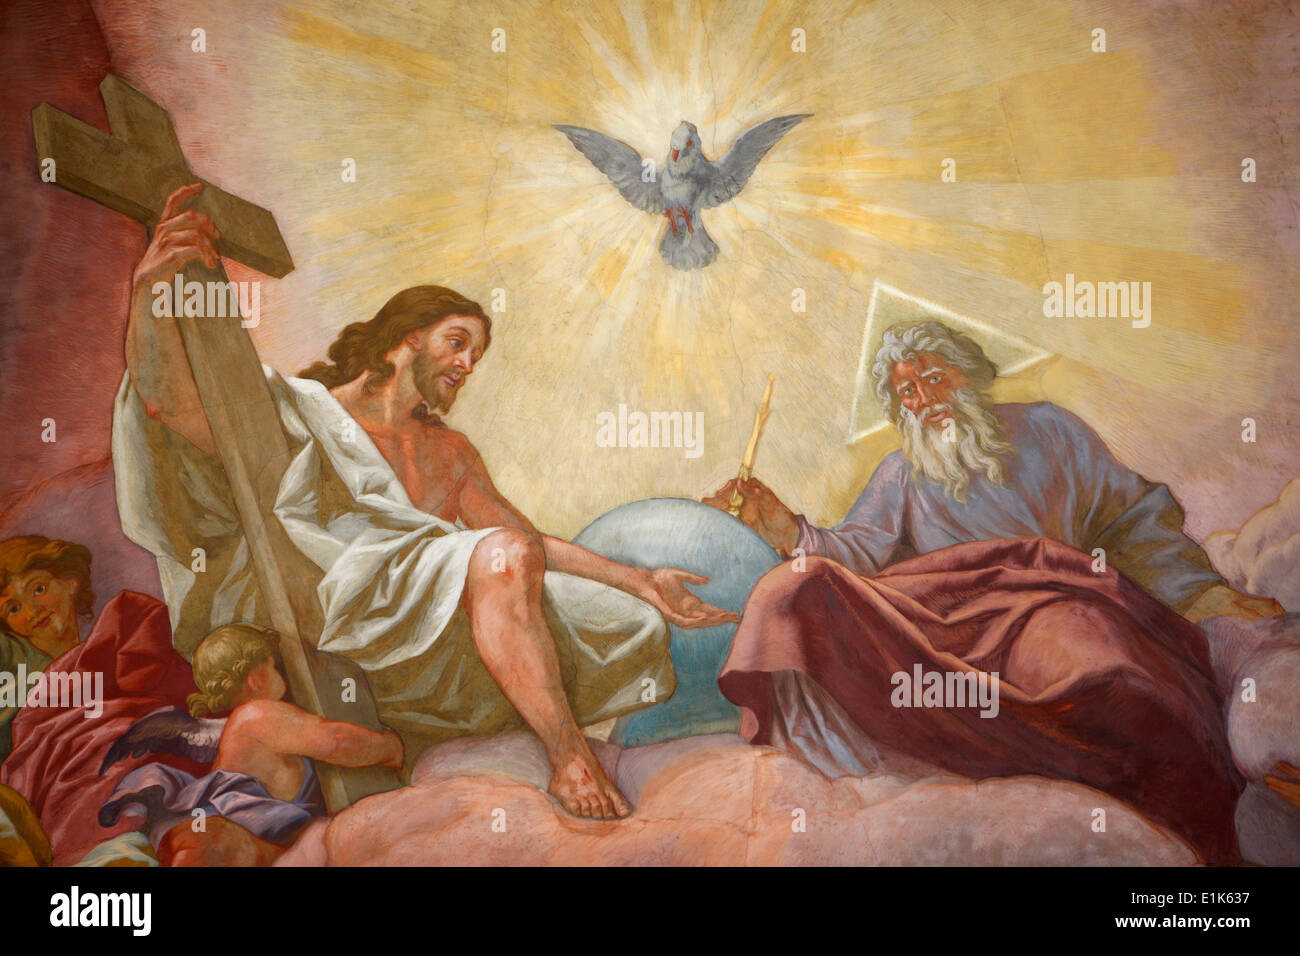 Franciscan Church of Vienna. Jesus, God and the holy spirit. Stock Photo